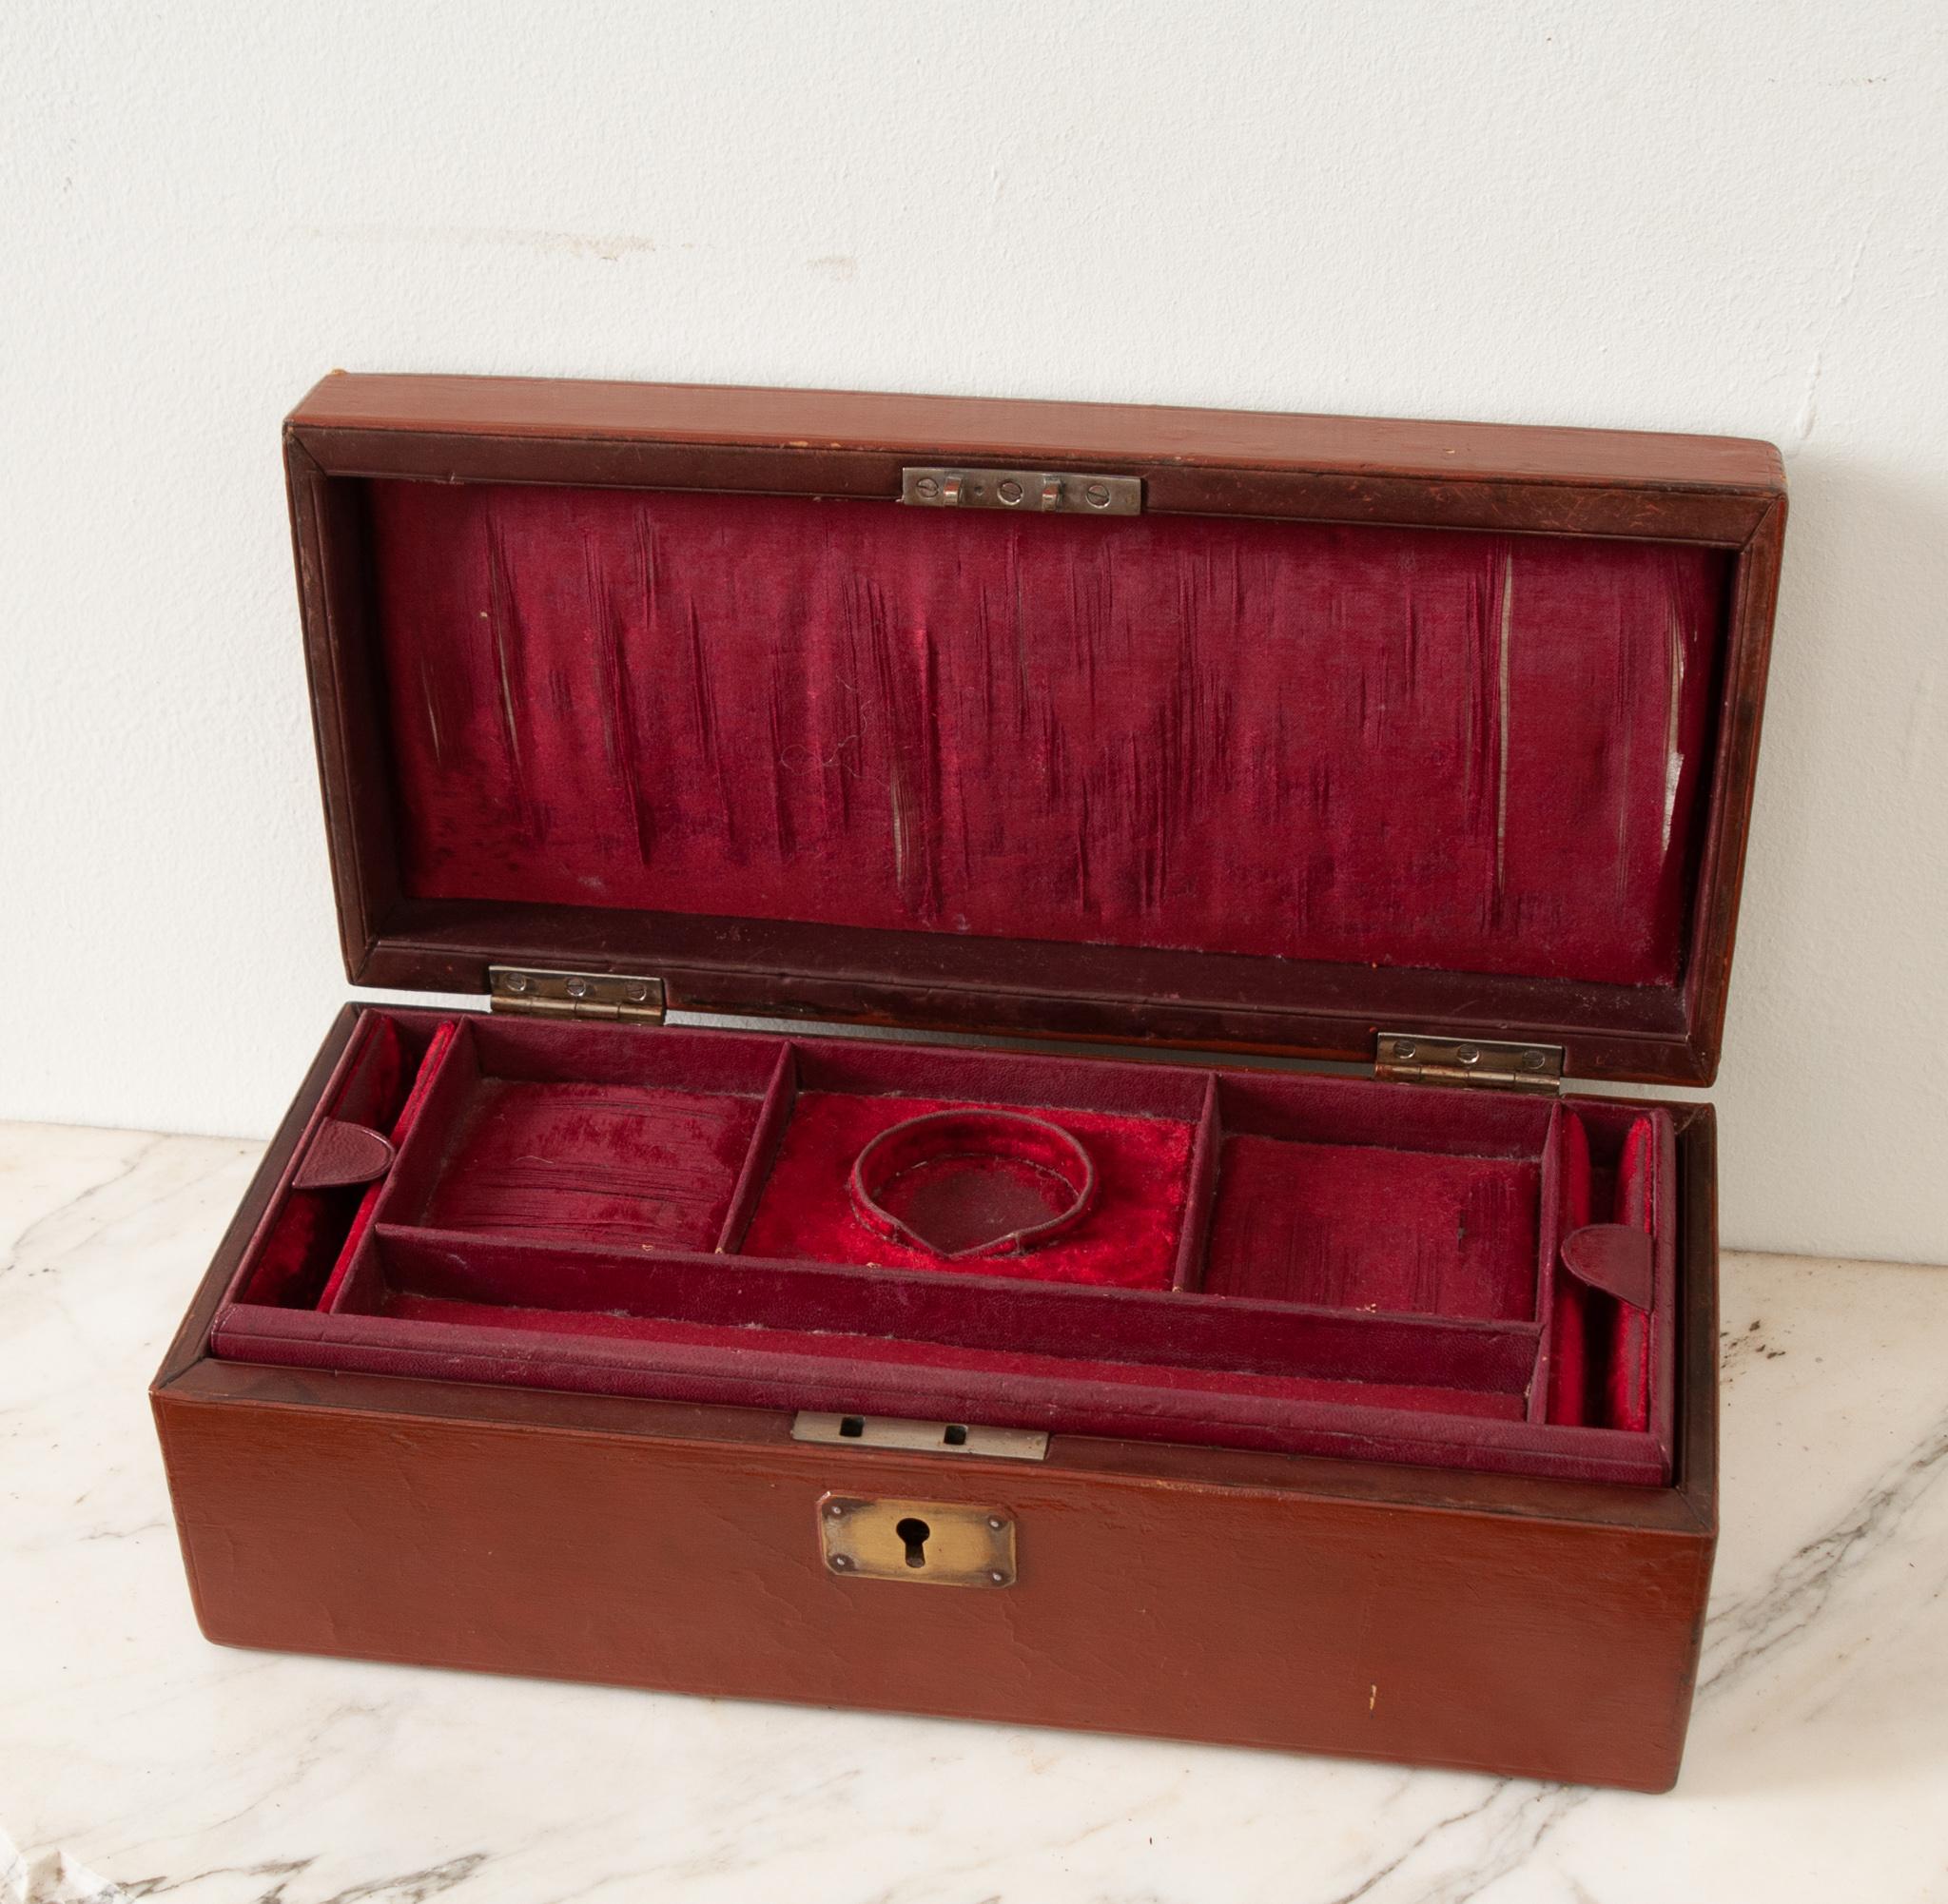 Painted Leather Jewelry Box In Good Condition For Sale In Baton Rouge, LA